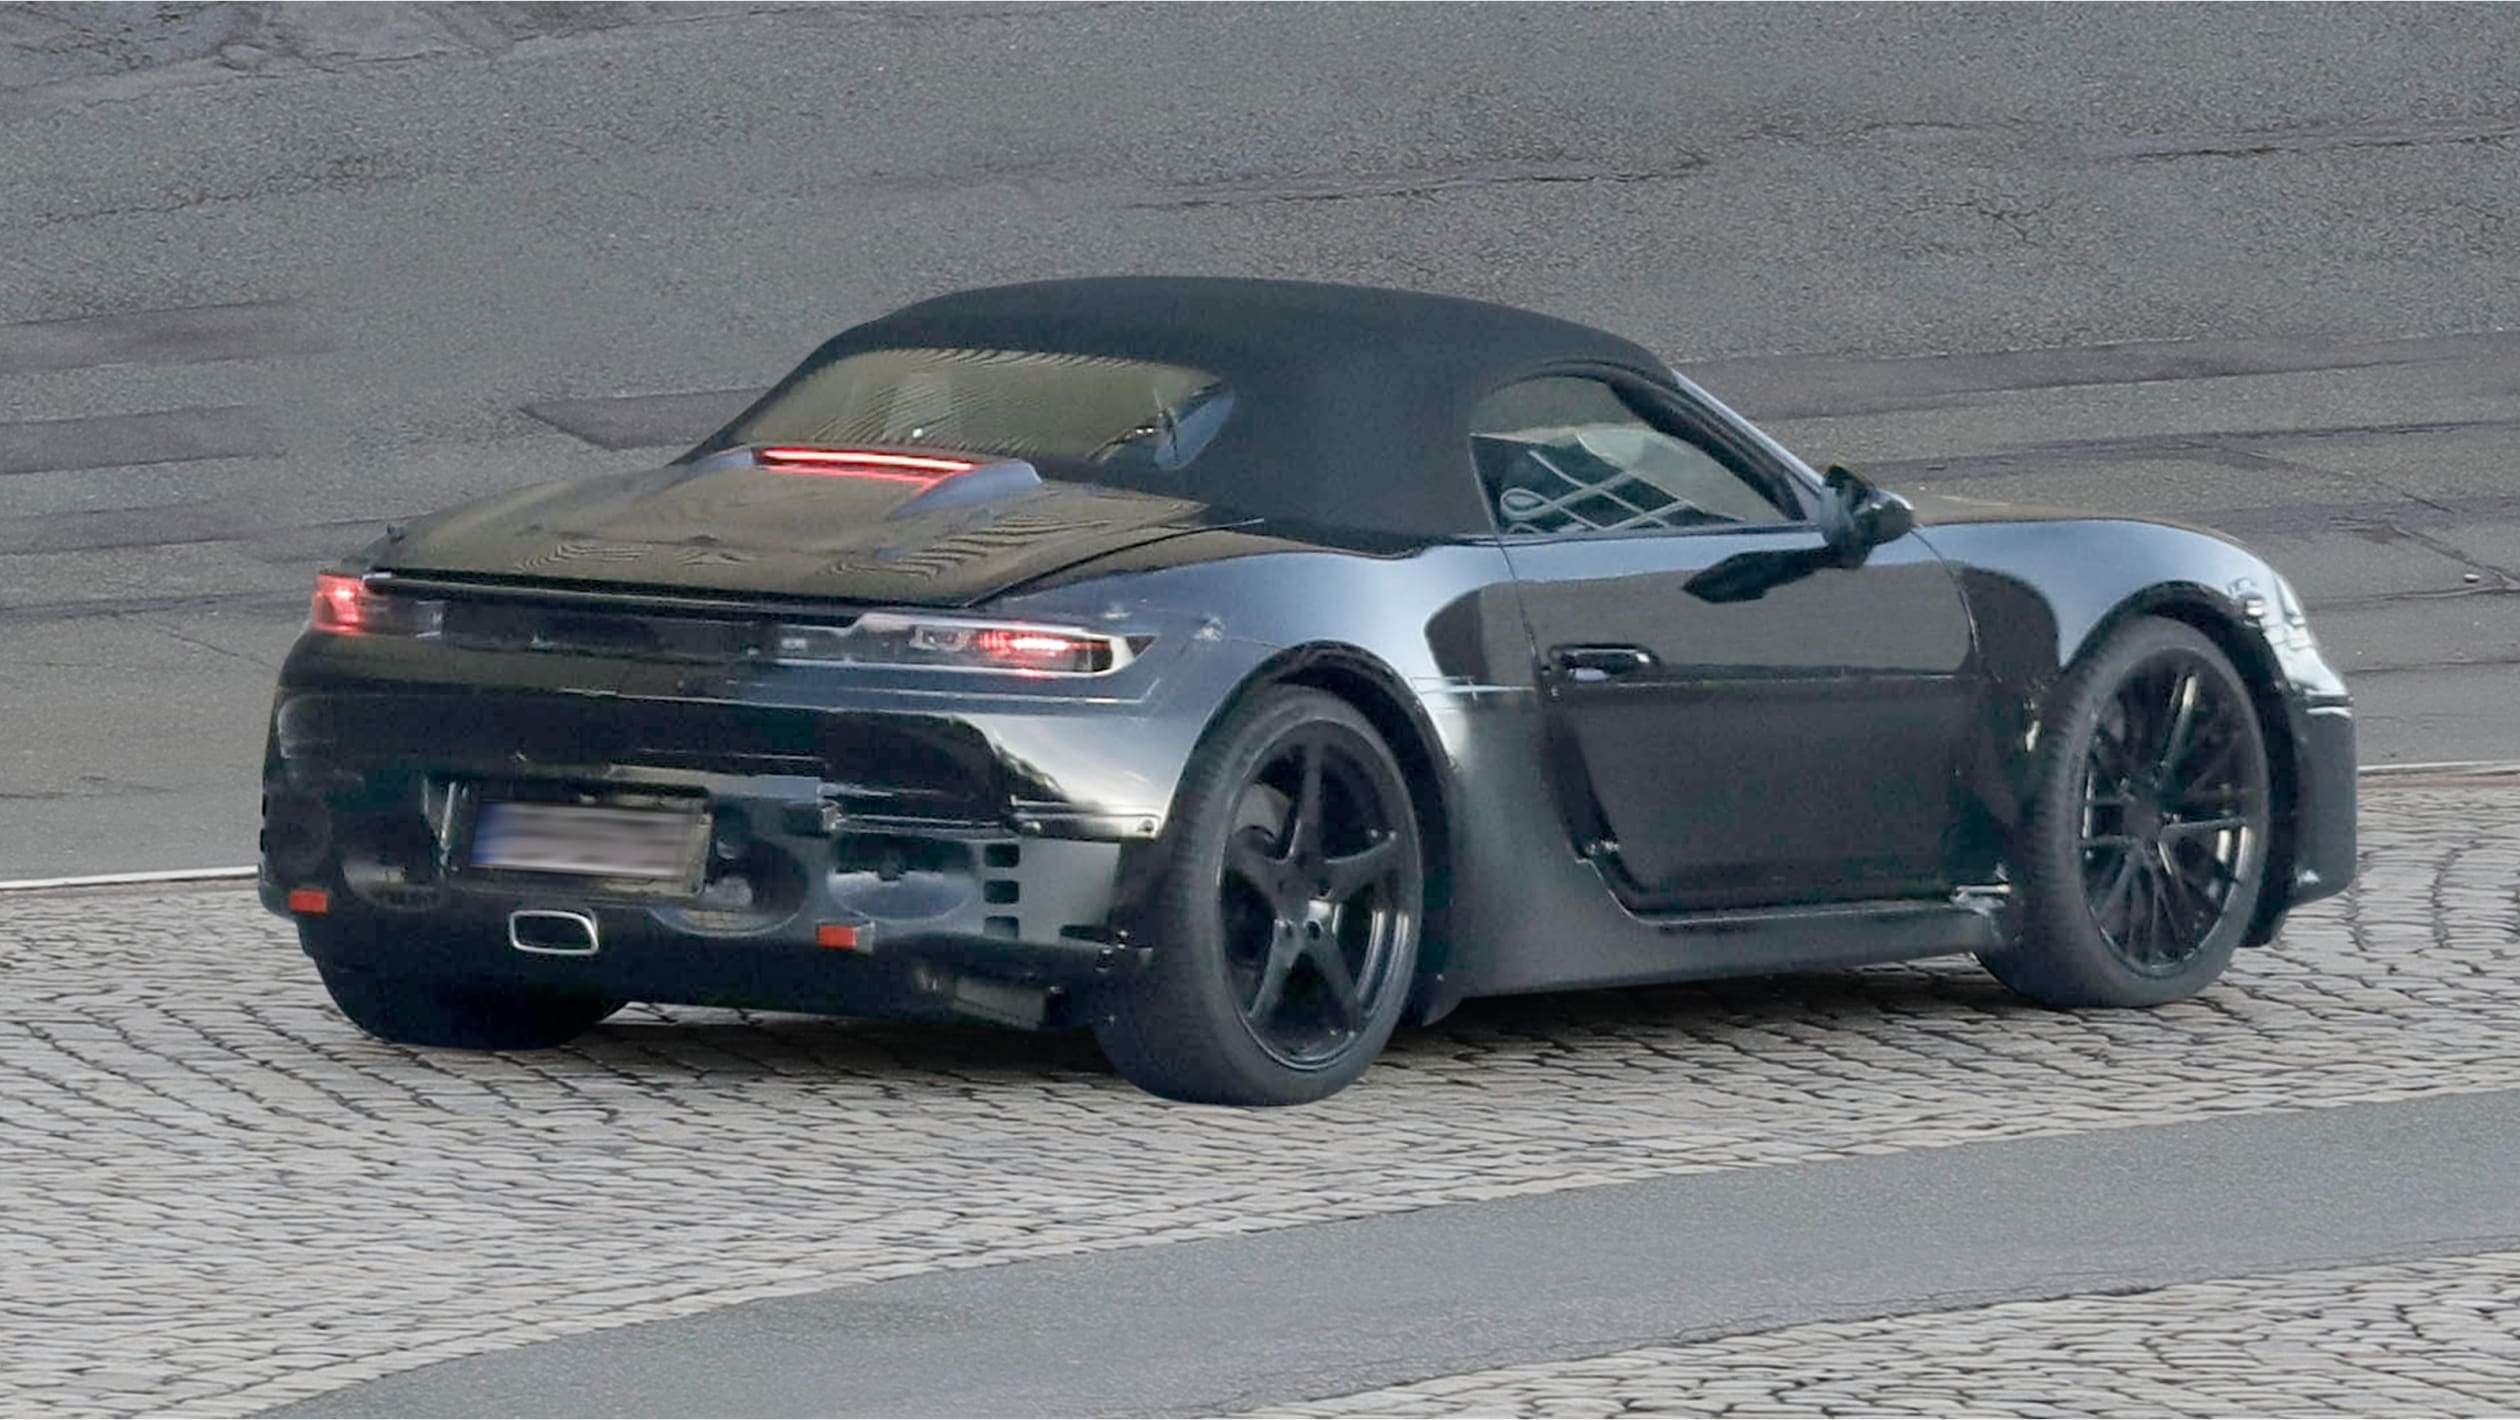 New Porsche Boxster (camouflaged) - rear angle